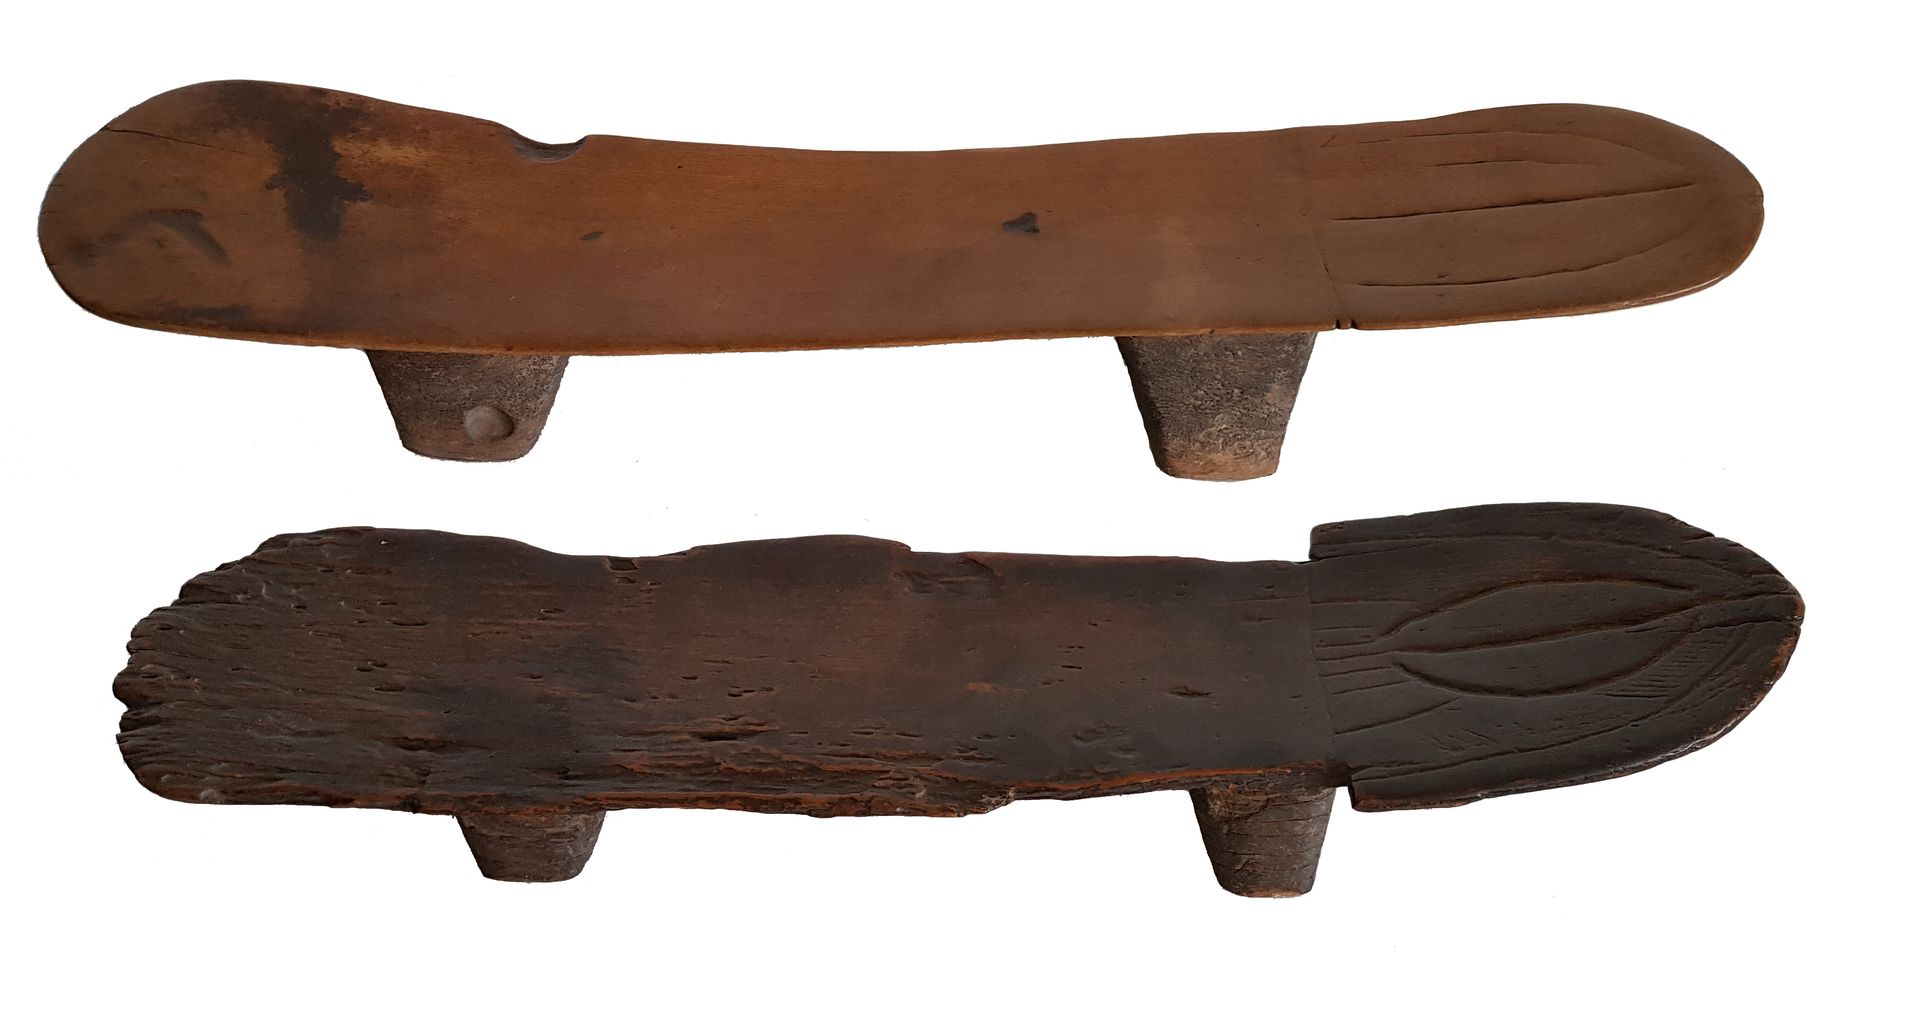 MBANDA BANCS (2) 
Carved in phallic form, wood with old patina. Lengths: 112 and&hellip;